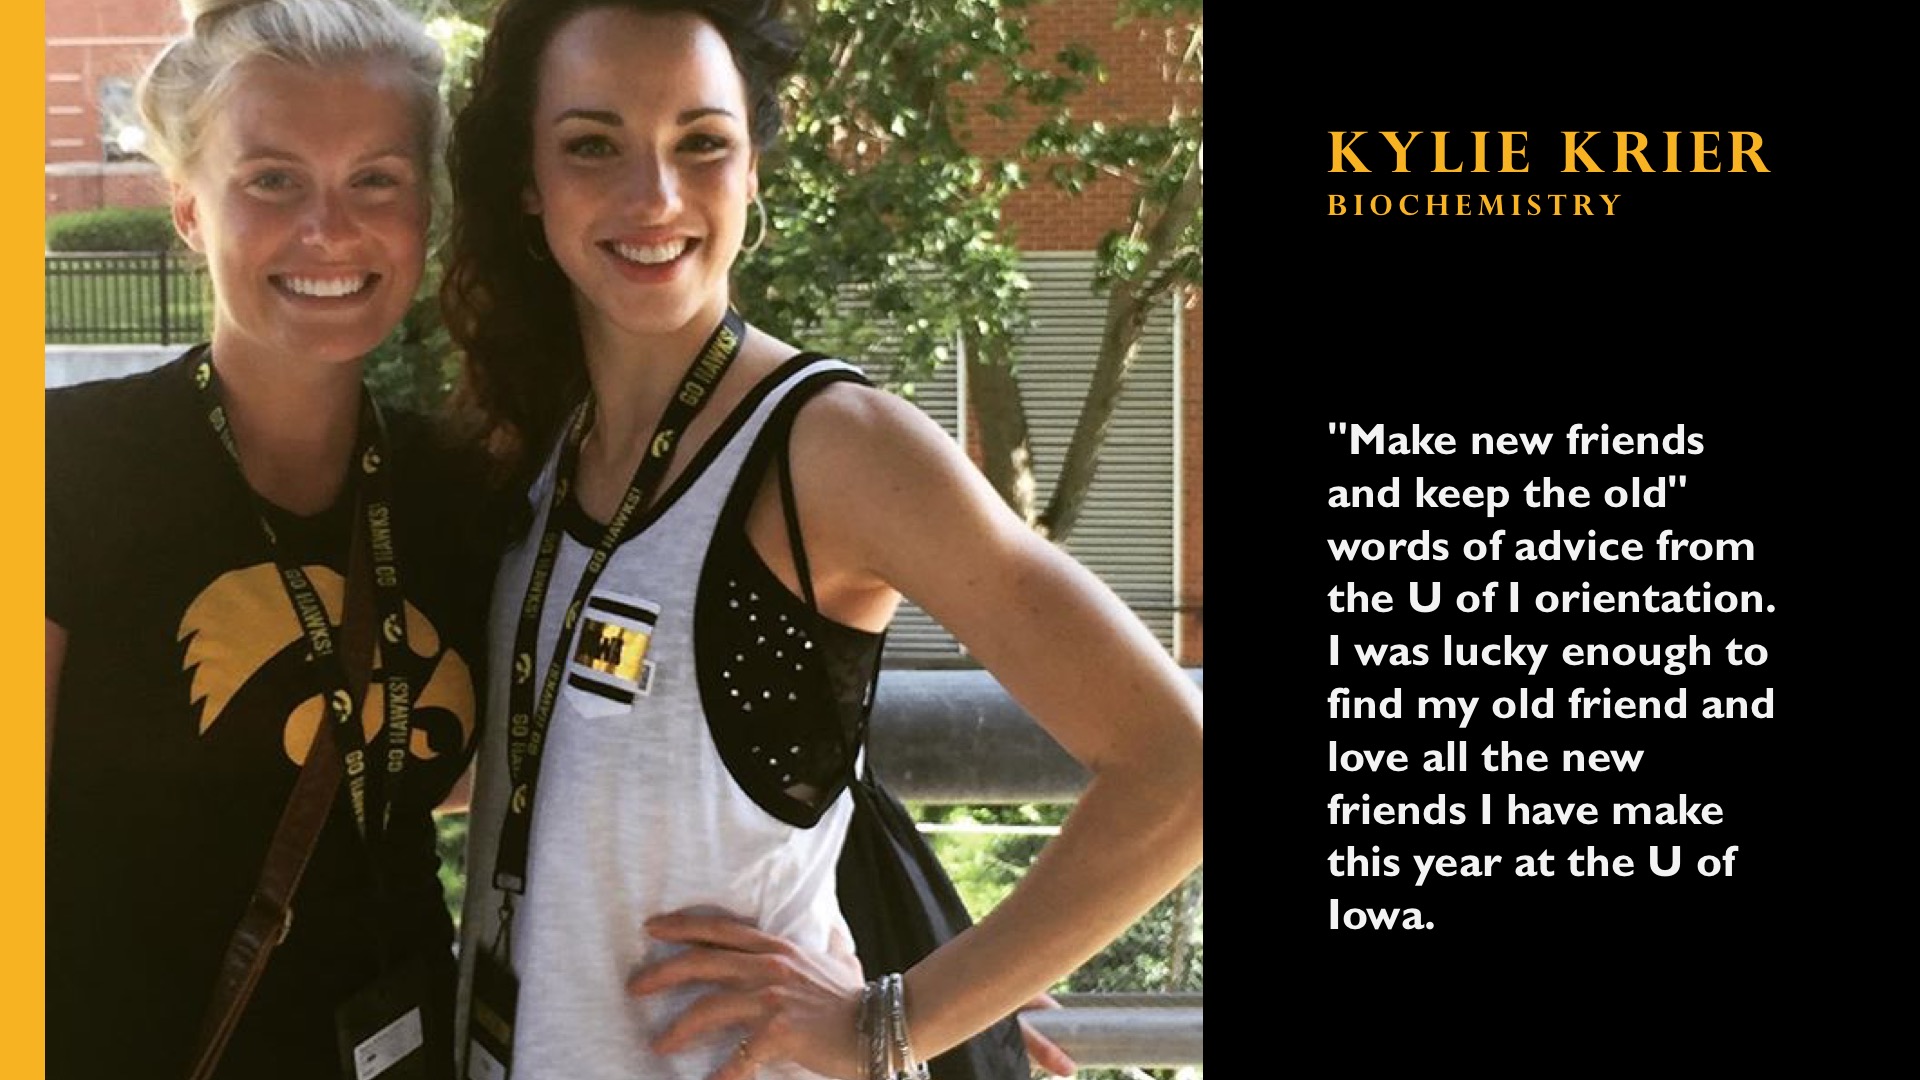 Kylie Krier. Biochemistry. "Make new friends and keep the old" words of advice from the U of I orientation. I was lucky enough to find my old friend and love all of the new friends I have made this year at the U of Iowa.